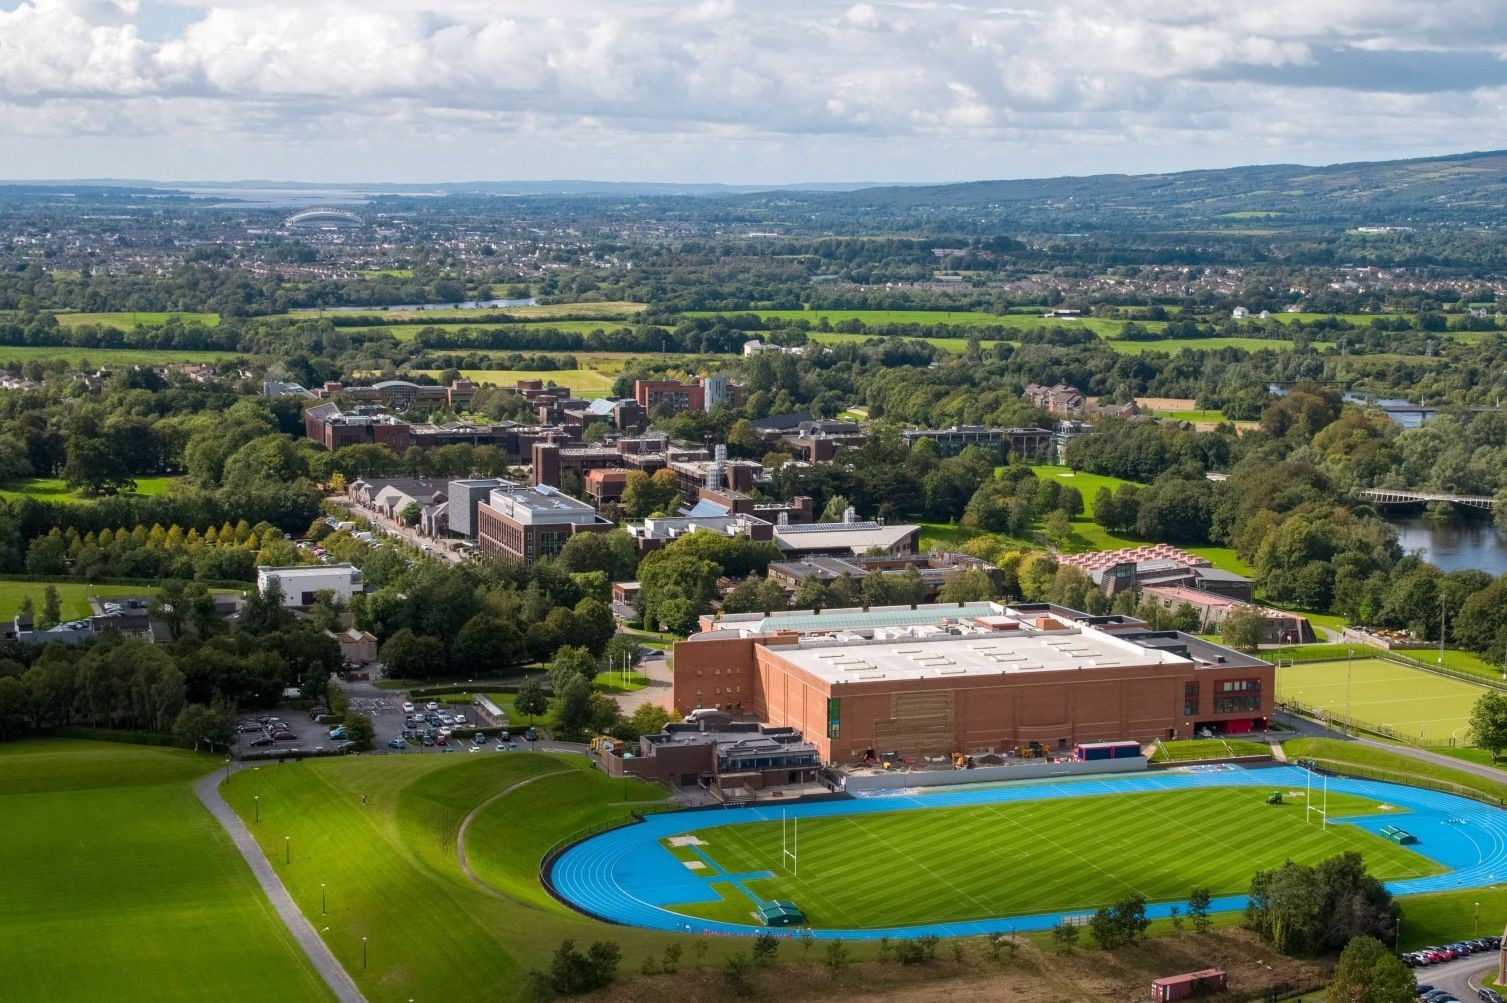 The University of Limerick will host the competition in 2023 ©World Archery